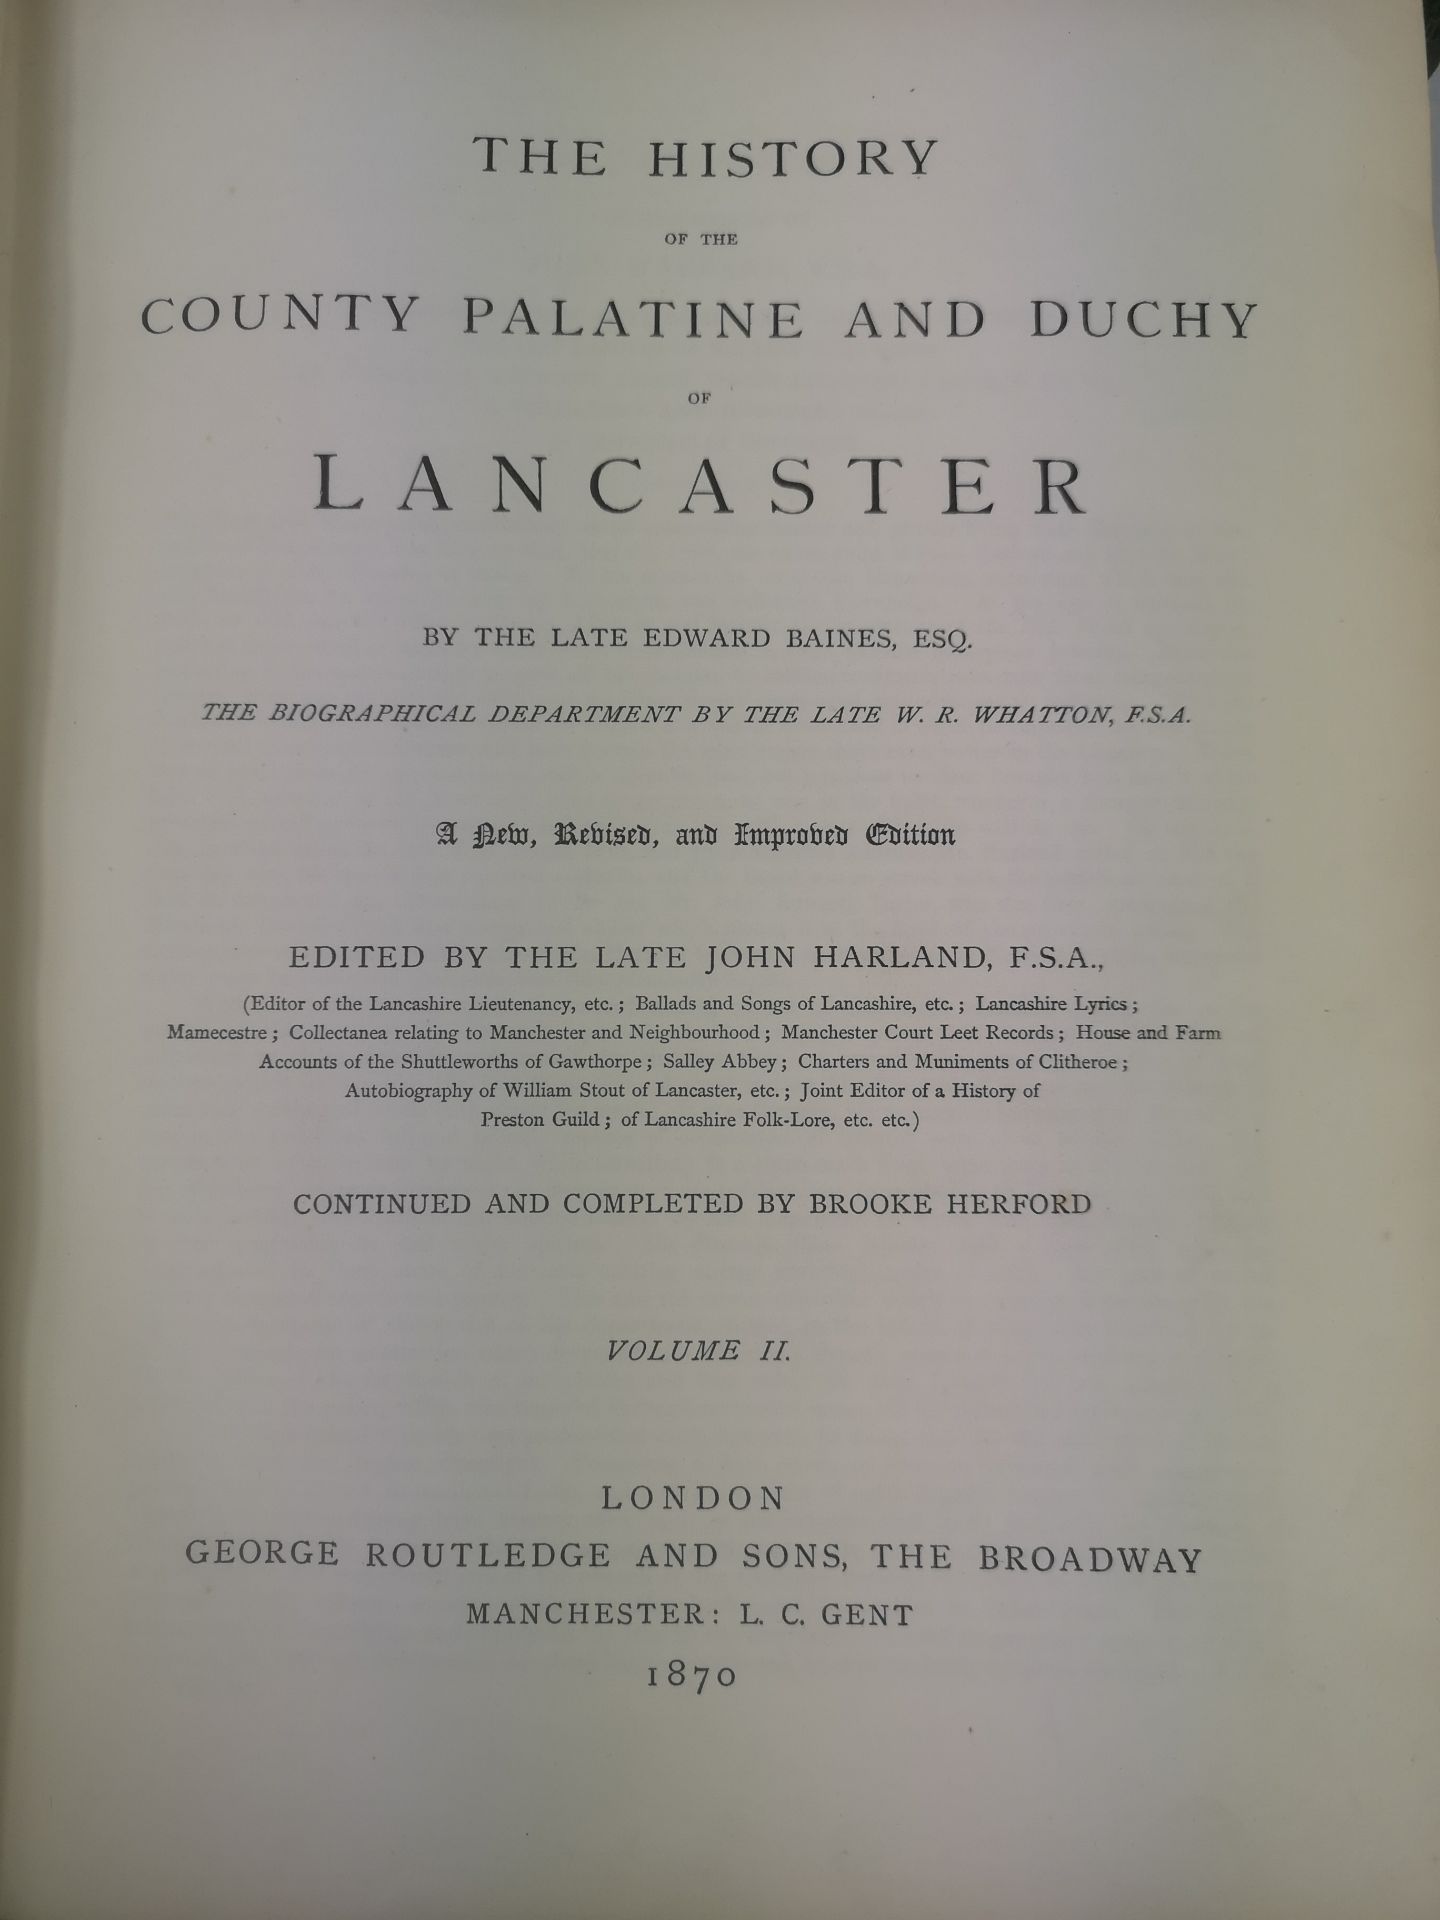 Baines History of Lancashire, 1870 and other works - Image 3 of 7